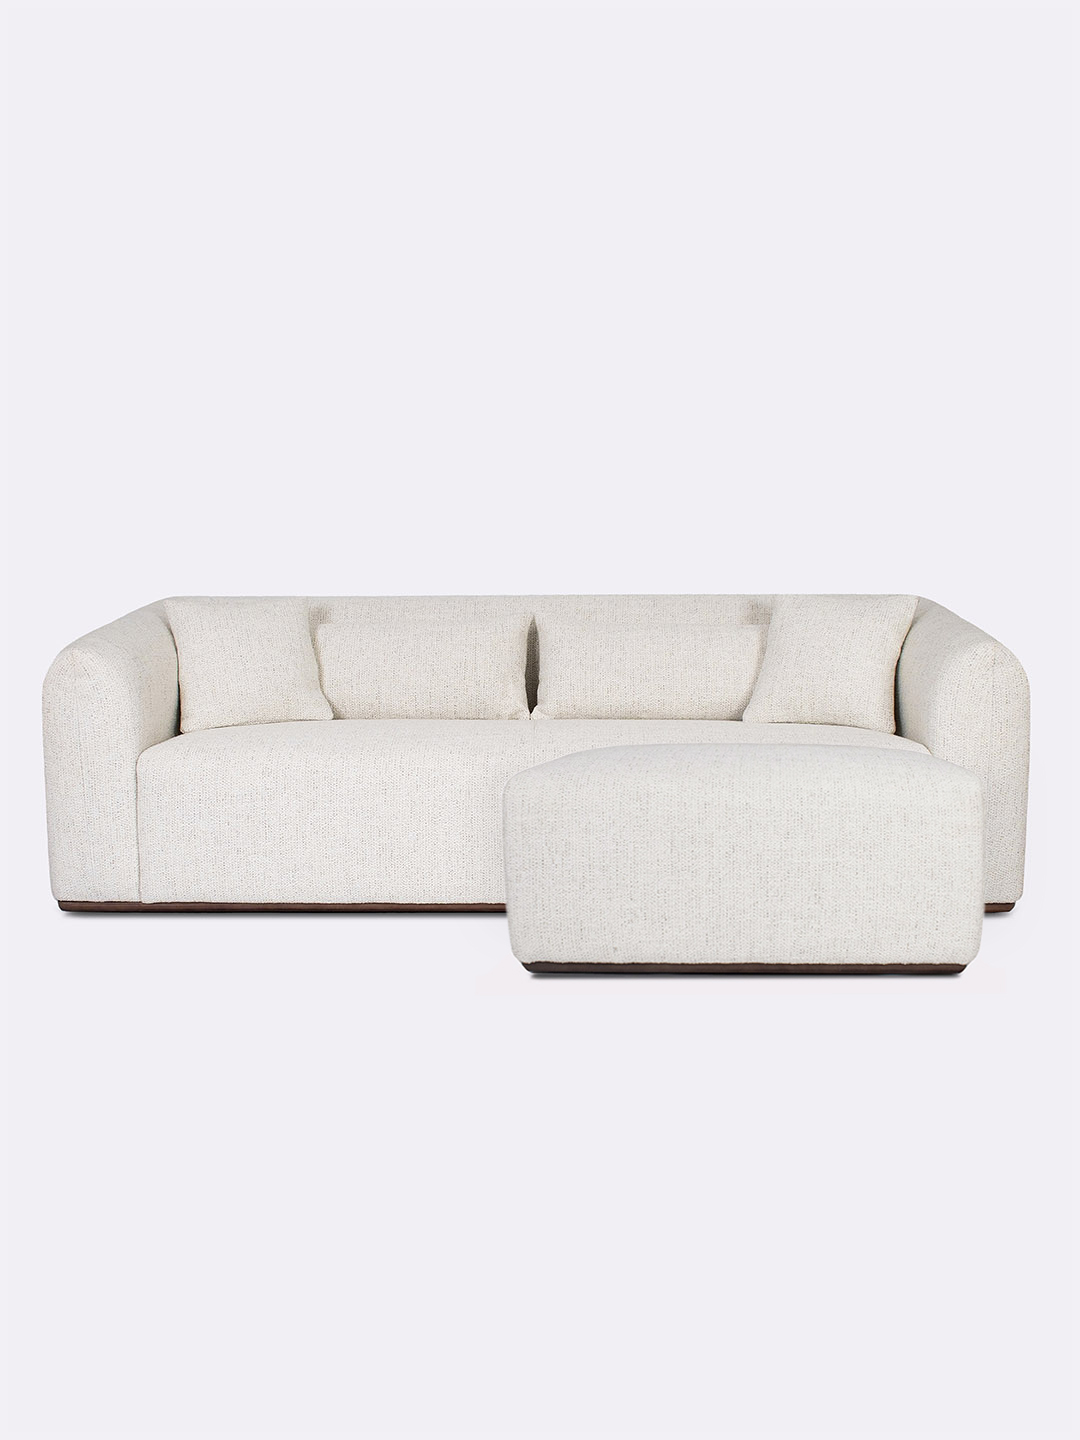 mitchell sofa and ottoman in ember cream texure